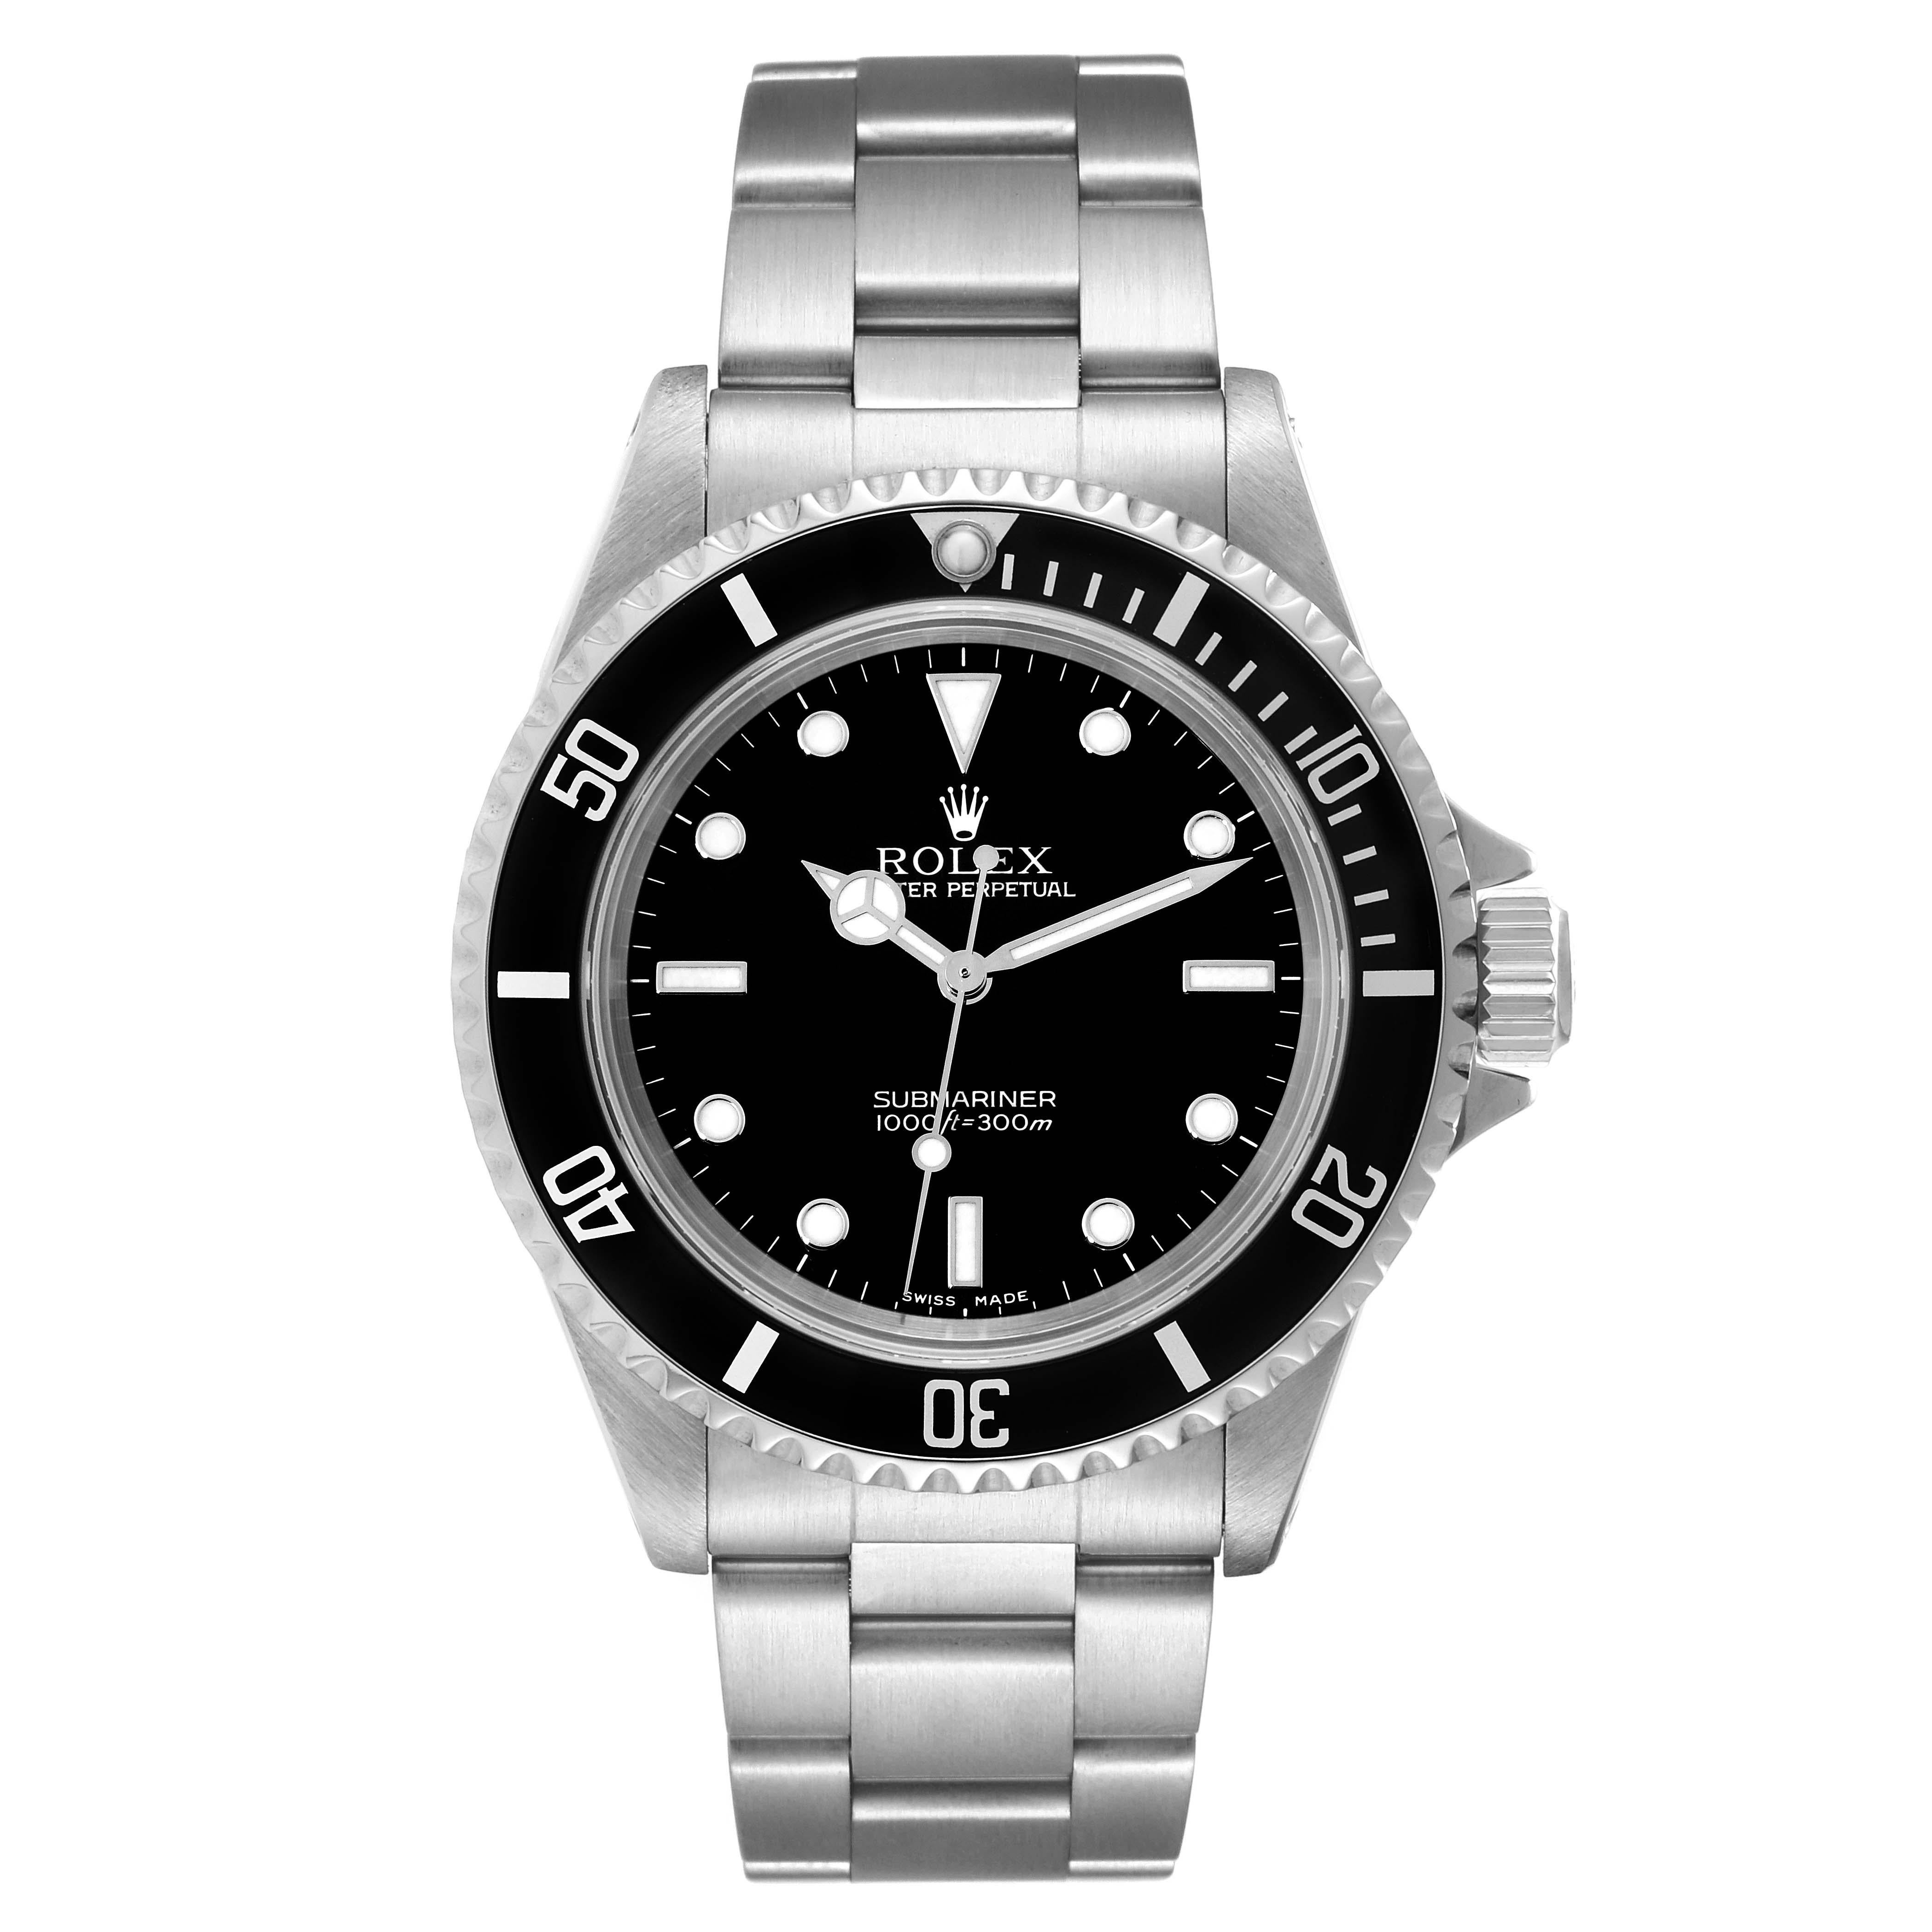 Rolex Submariner No Date 40mm 2 Liner Steel Mens Watch 14060 Box Papers. Officially certified chronometer automatic self-winding movement. Stainless steel case 40.0 mm in diameter. Rolex logo on the crown. Special time-lapse unidirectional rotating